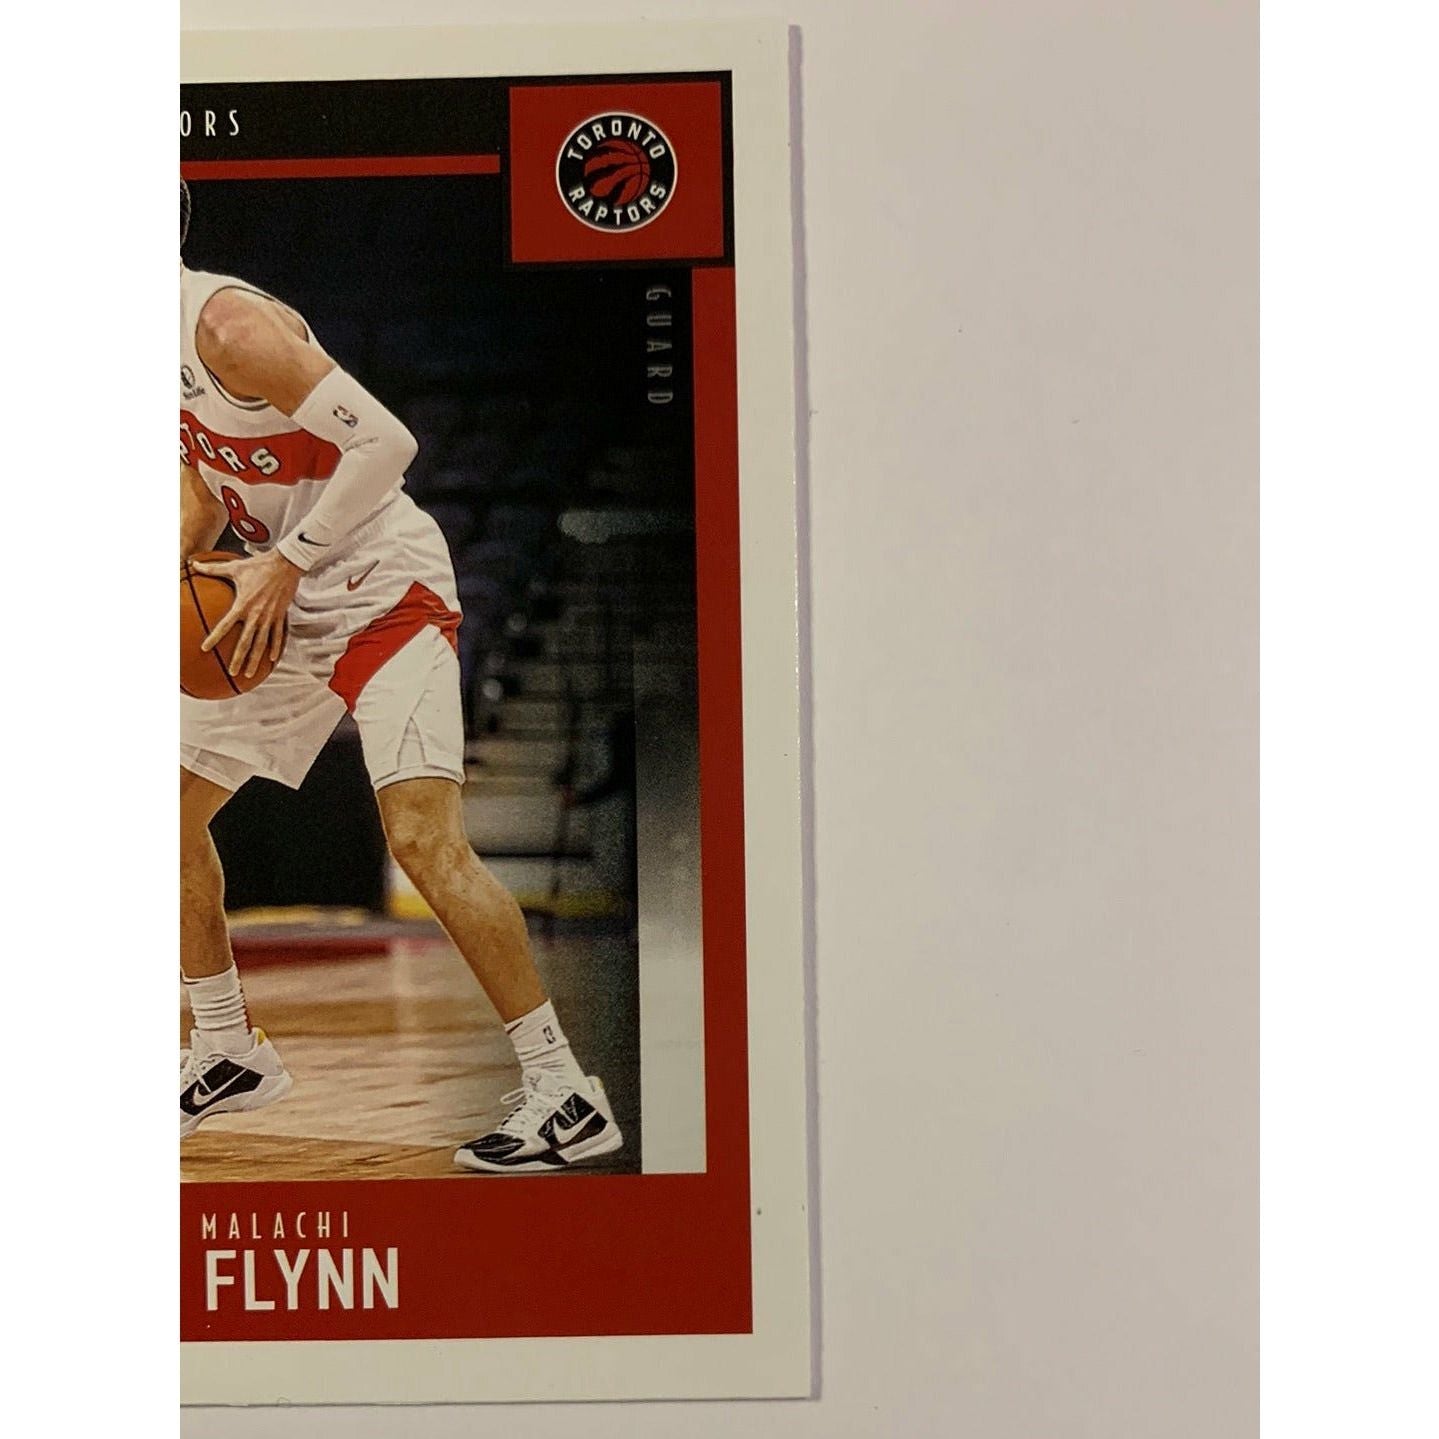  2020-21 Score Malachi Flynn RC  Local Legends Cards & Collectibles